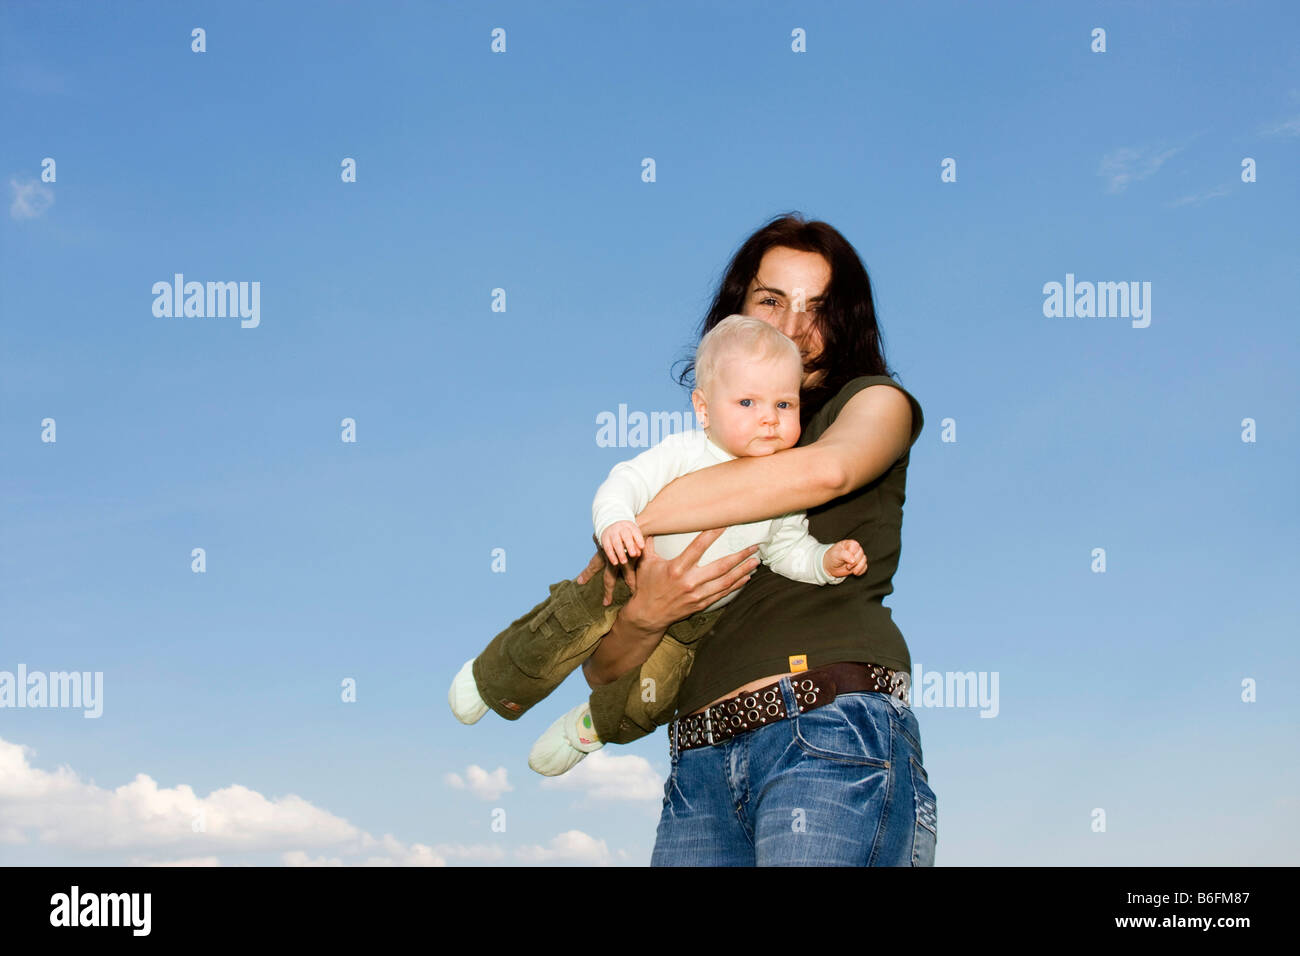 Mother, 32 years old, and her baby girl, 9 months old, outside Stock Photo